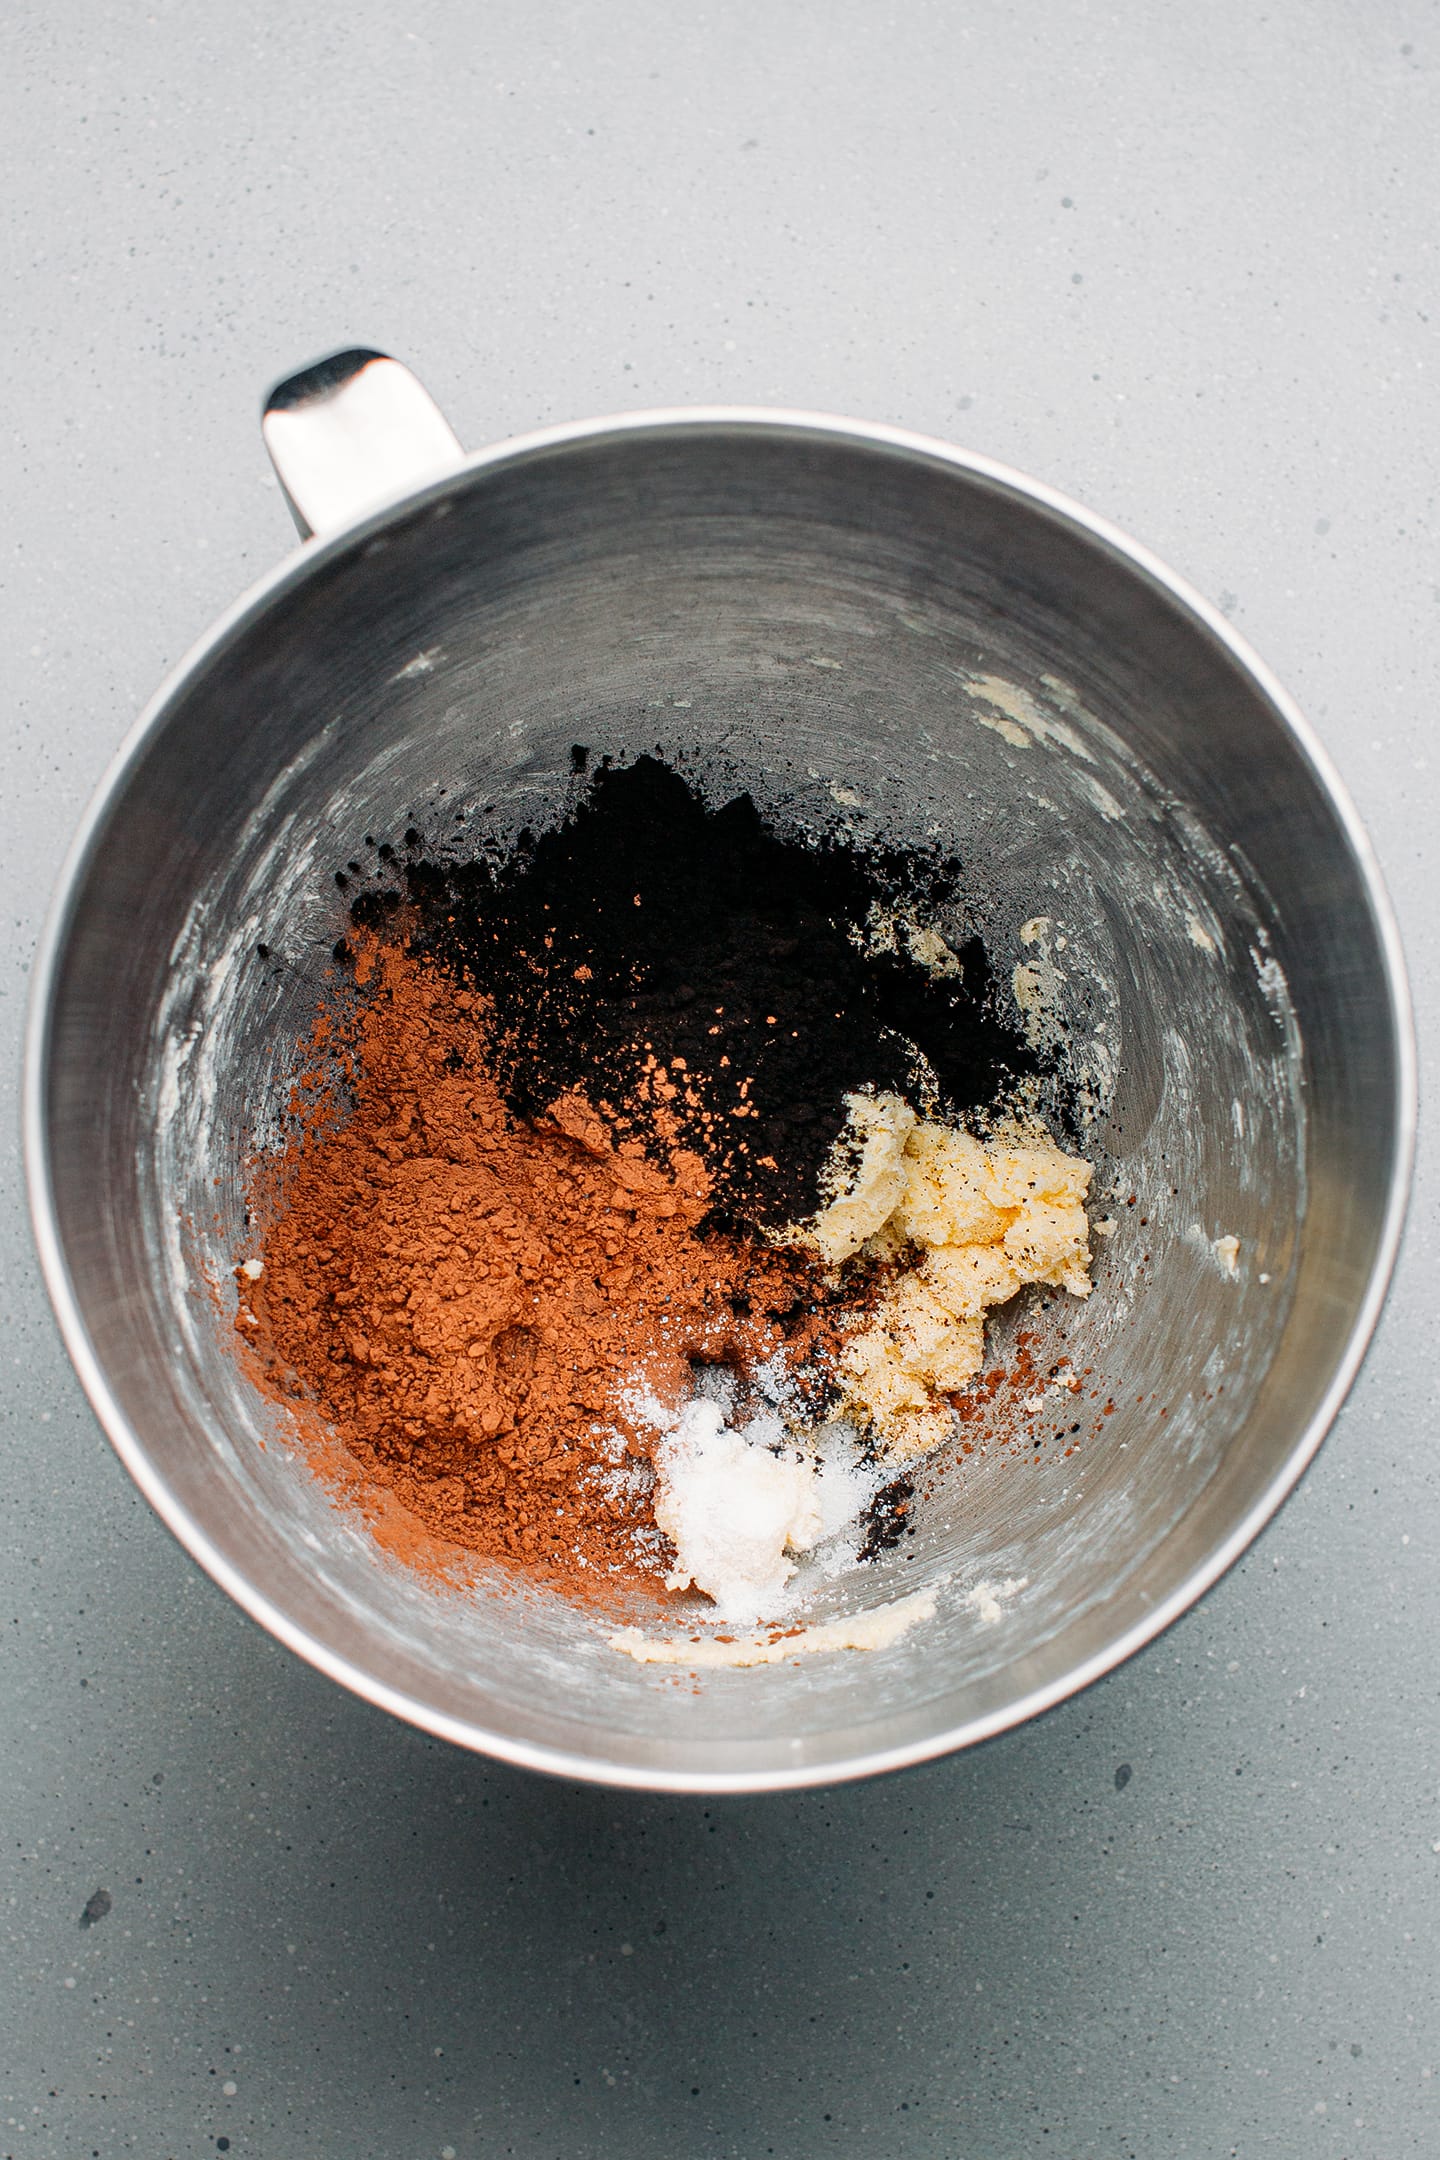 Creamed butter, cocoa powder, and salt in a mixing bowl.